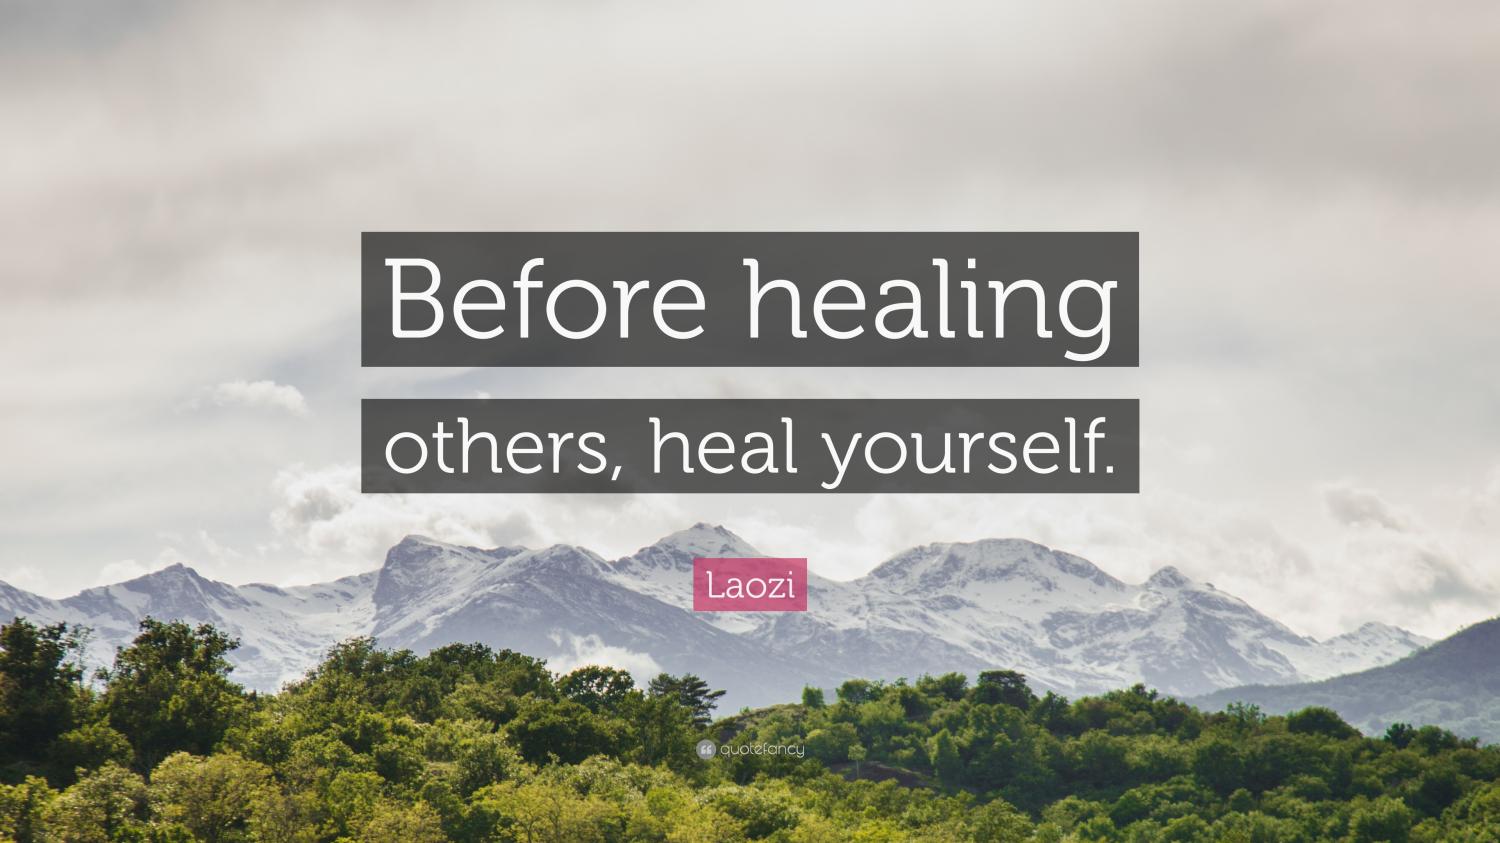 https://cdn.noron.vn/2022/04/06/553622-laozi-quote-before-healing-others-heal-yourself-1649237223.jpg